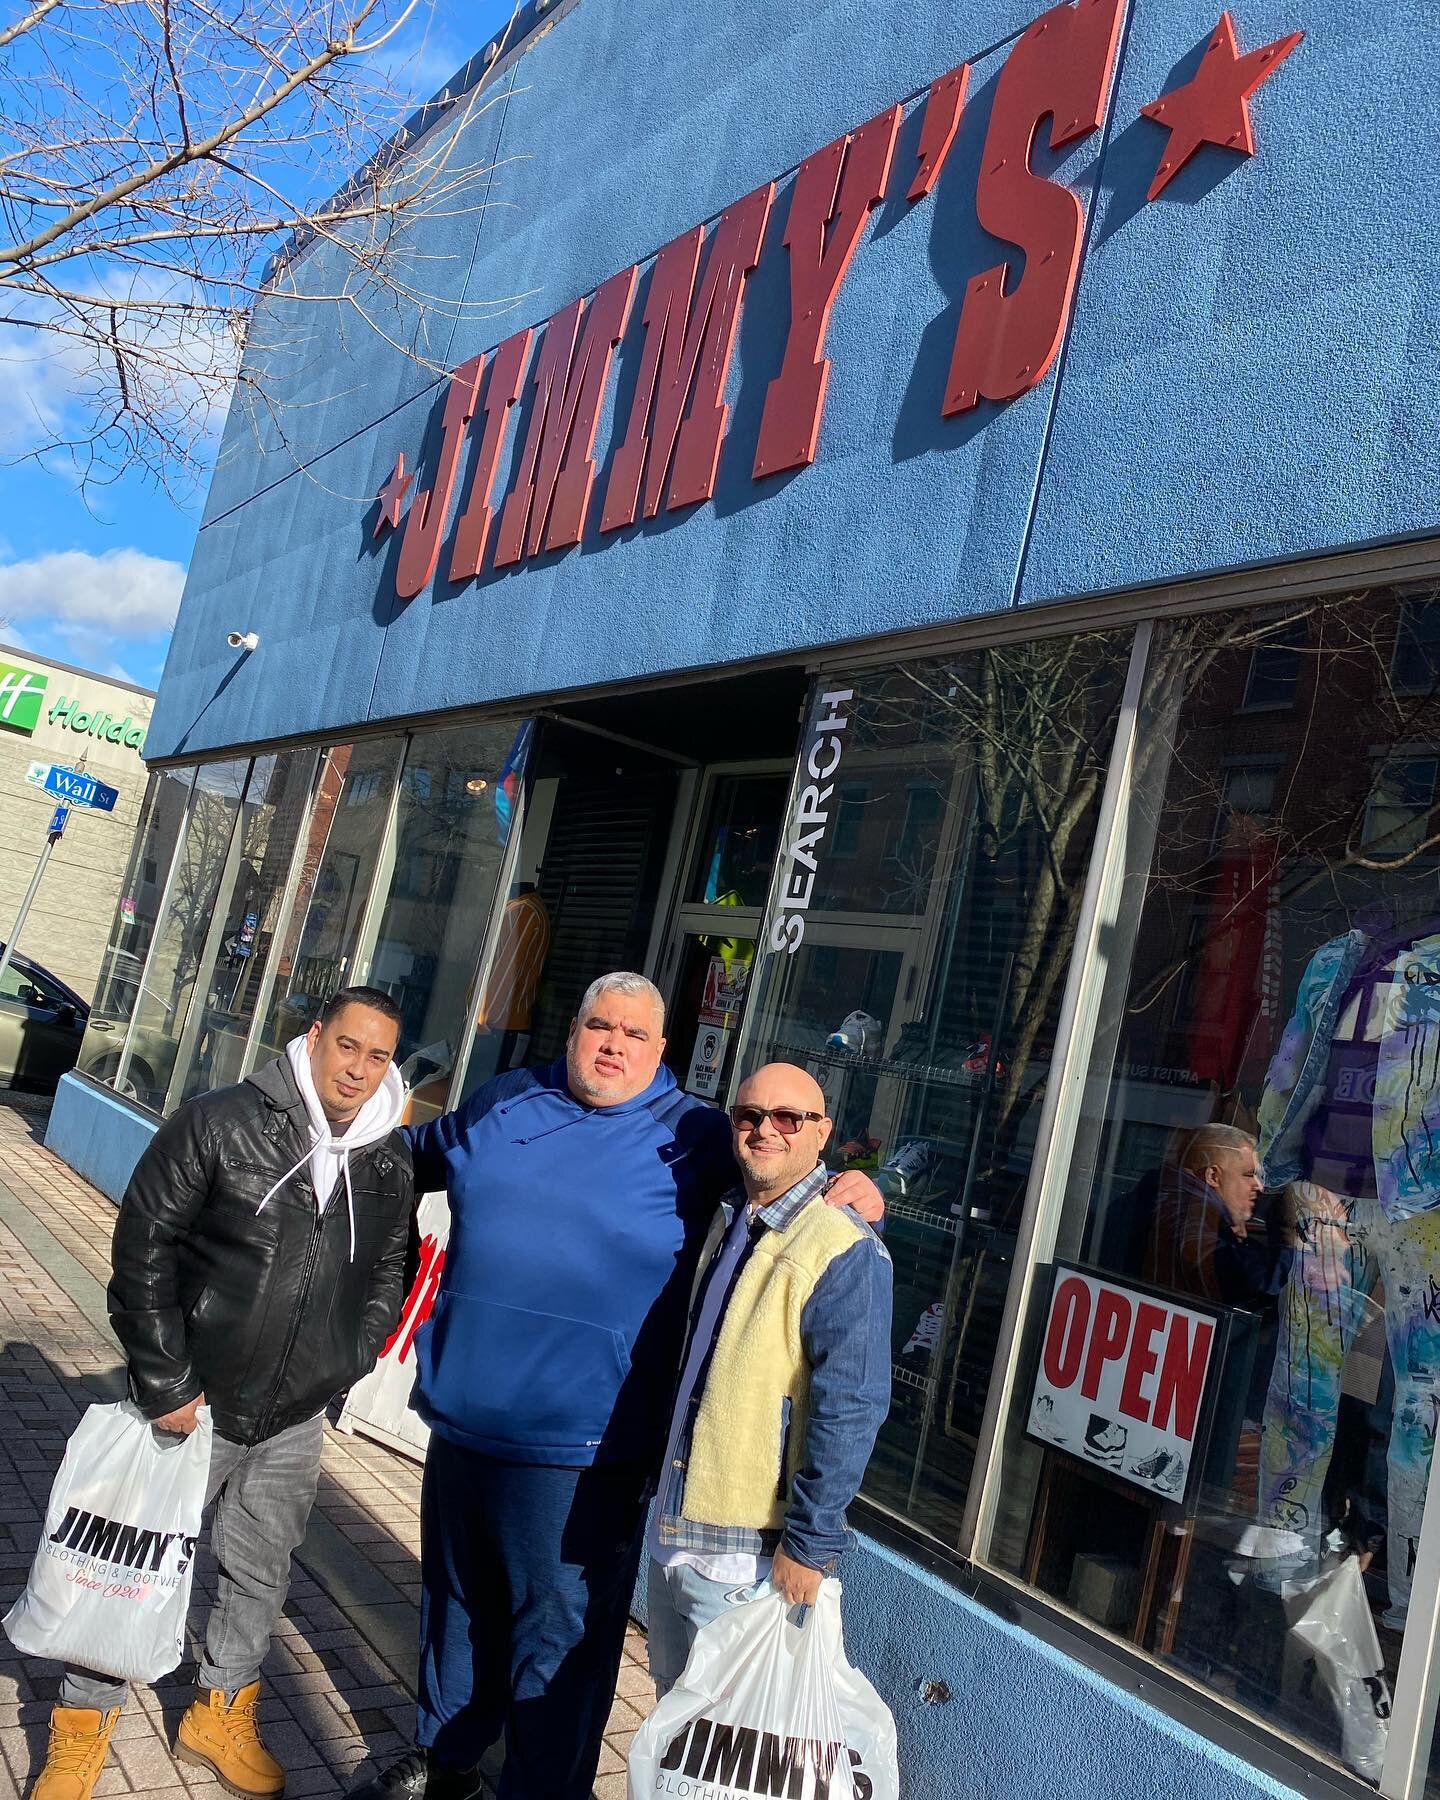 So great to see a bit of Jimmy&rsquo;s history back in town. Julio, Joey and Juan all worked for us from 1988 to 1992. So great to see all of them. Any other former employees out there? #community #jimmys1920 #bpt  #cthistory